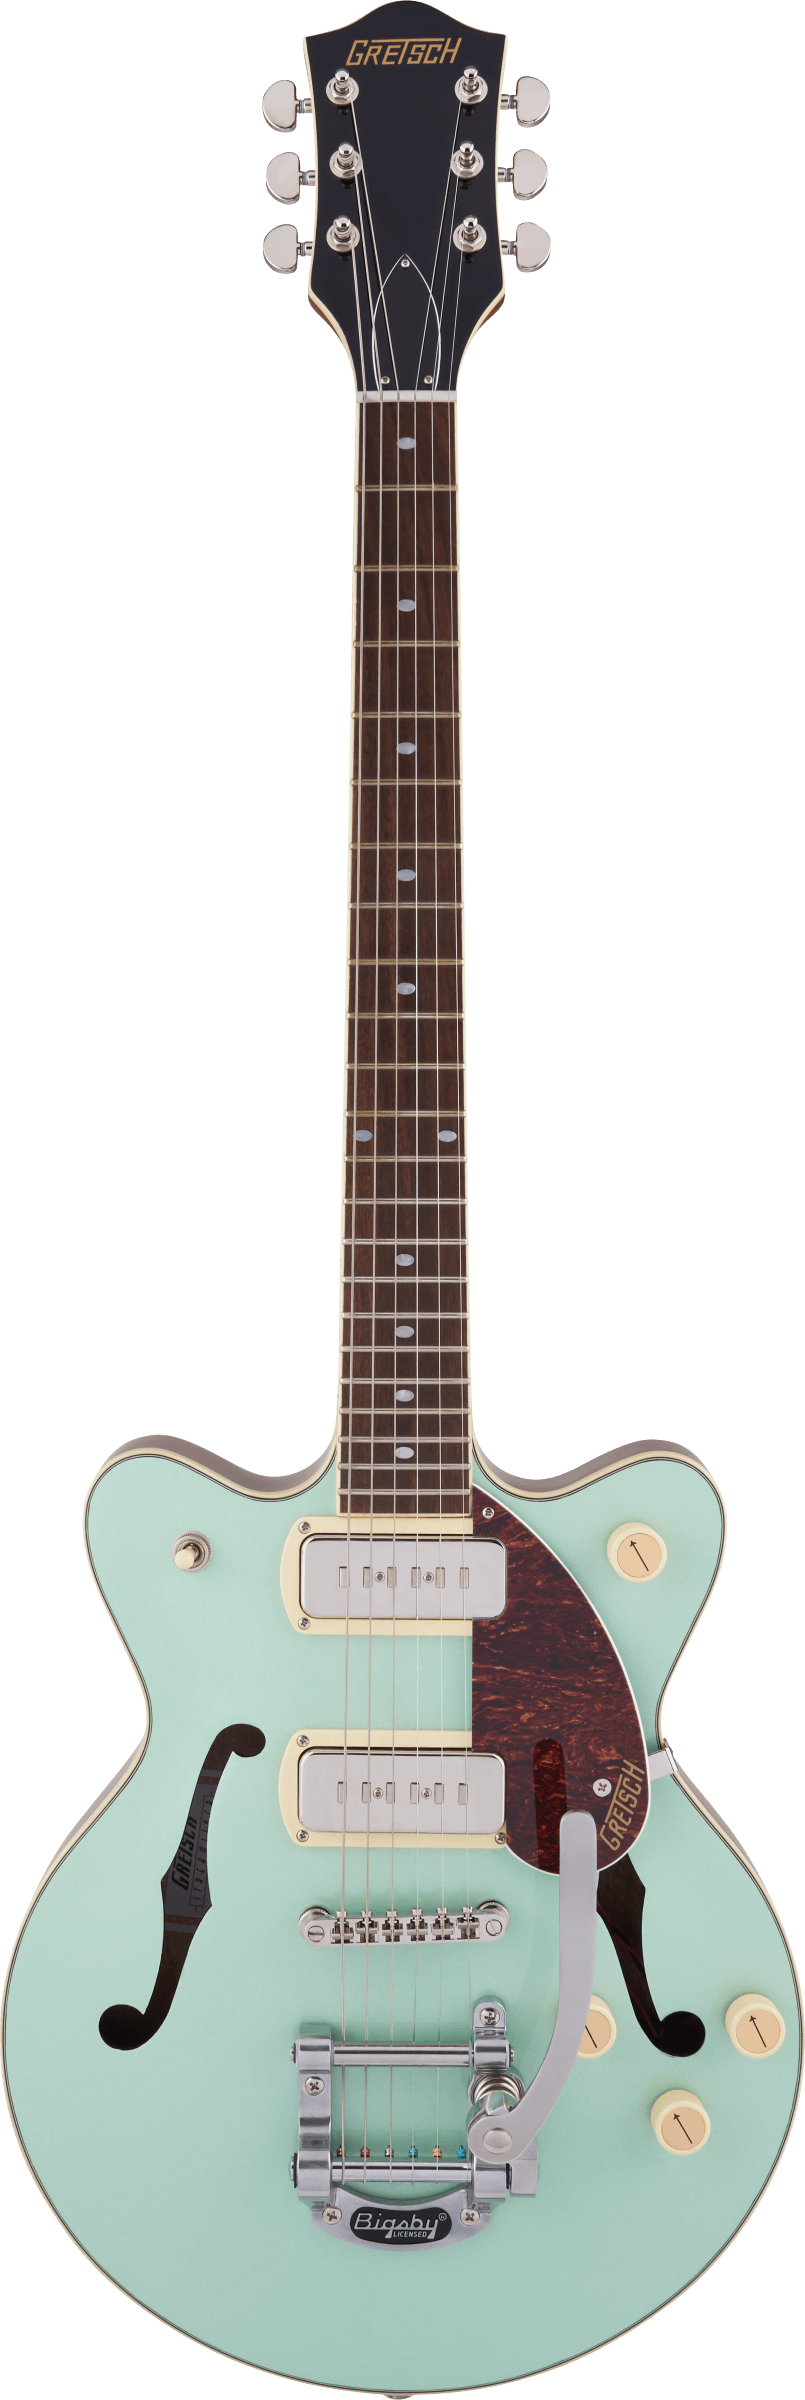 Gretsch G2655T-P90 Jr. Two-Tone Mint Metallic and Vintage Mahogany Stain - Regent Sounds